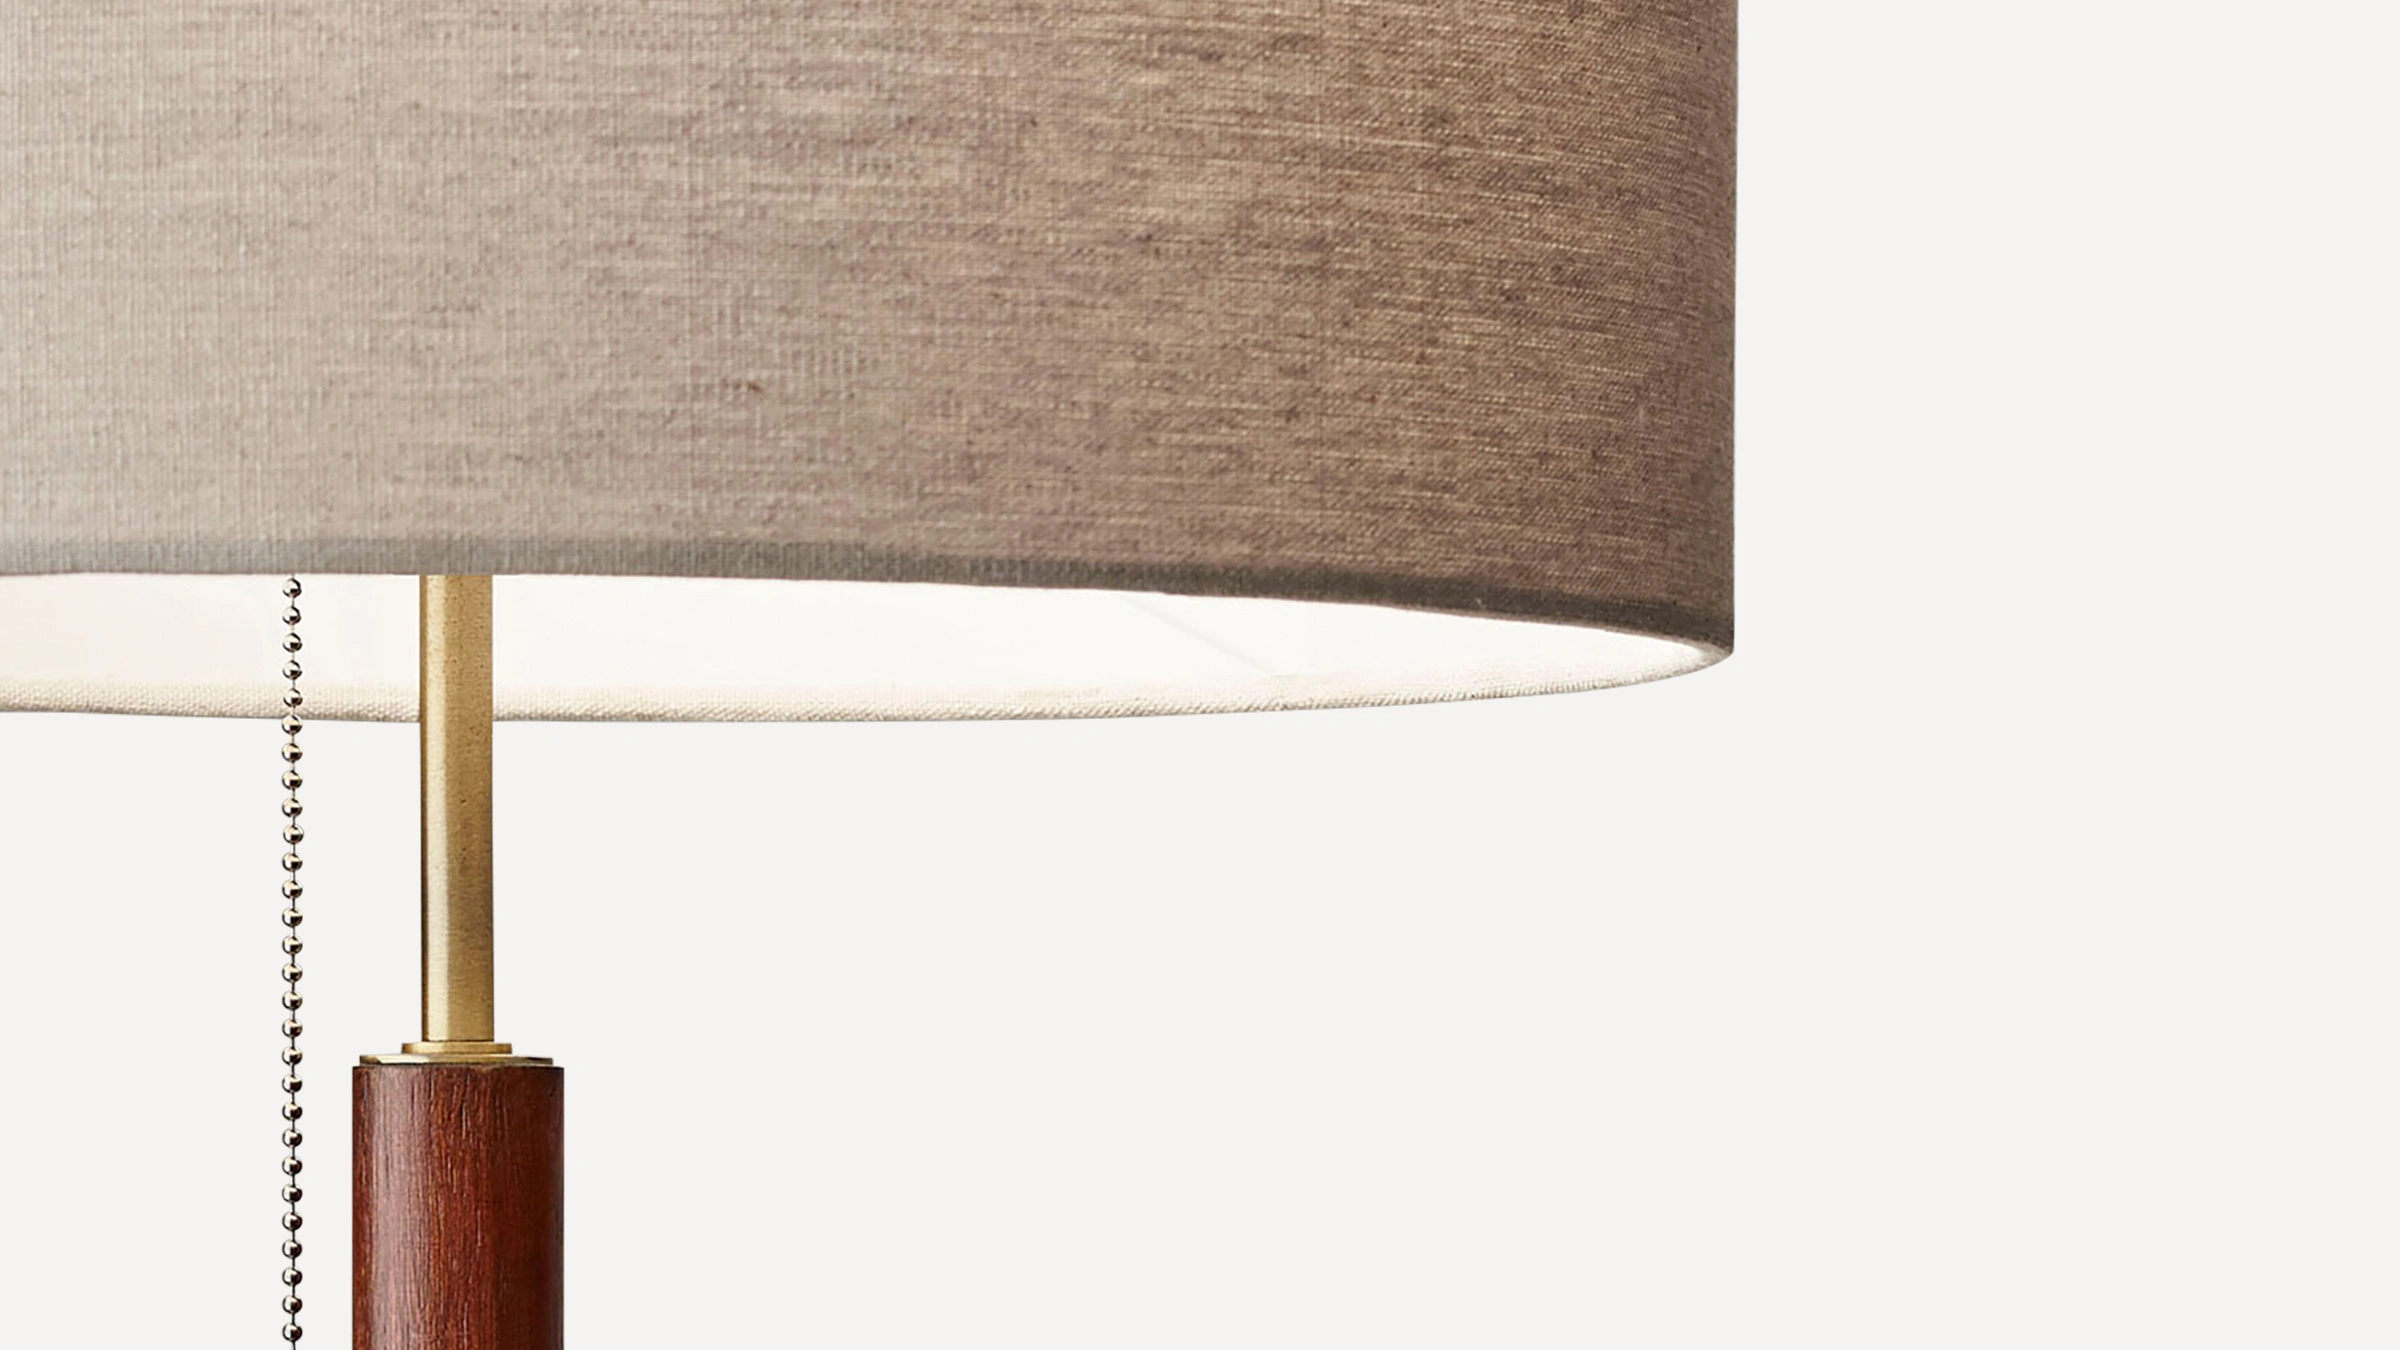 Hamilton Table Lamp By Adesso Burrow, Alabama Touch Table Lamp